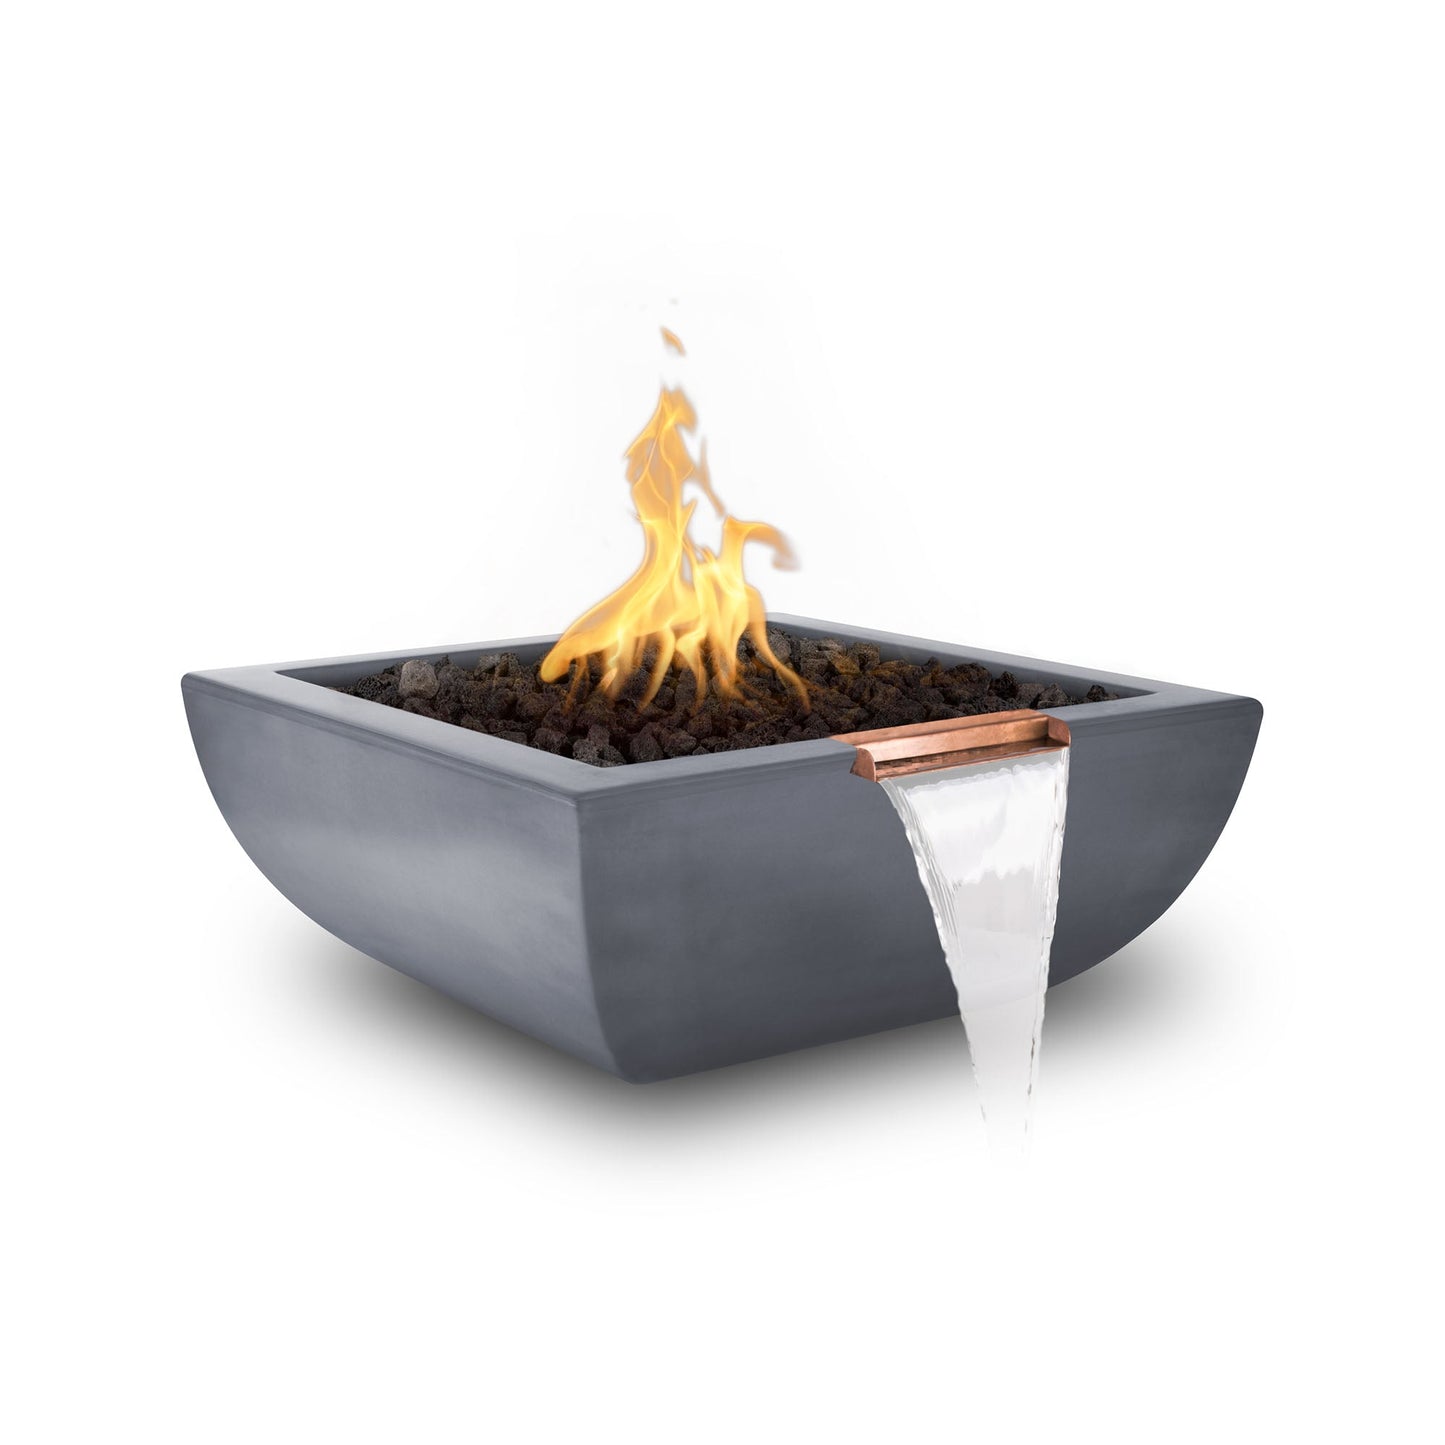 The Outdoor Plus Square Avalon 36" Rustic Moss Stone GFRC Concrete Liquid Propane Fire & Water Bowl with Match Lit with Flame Sense Ignition